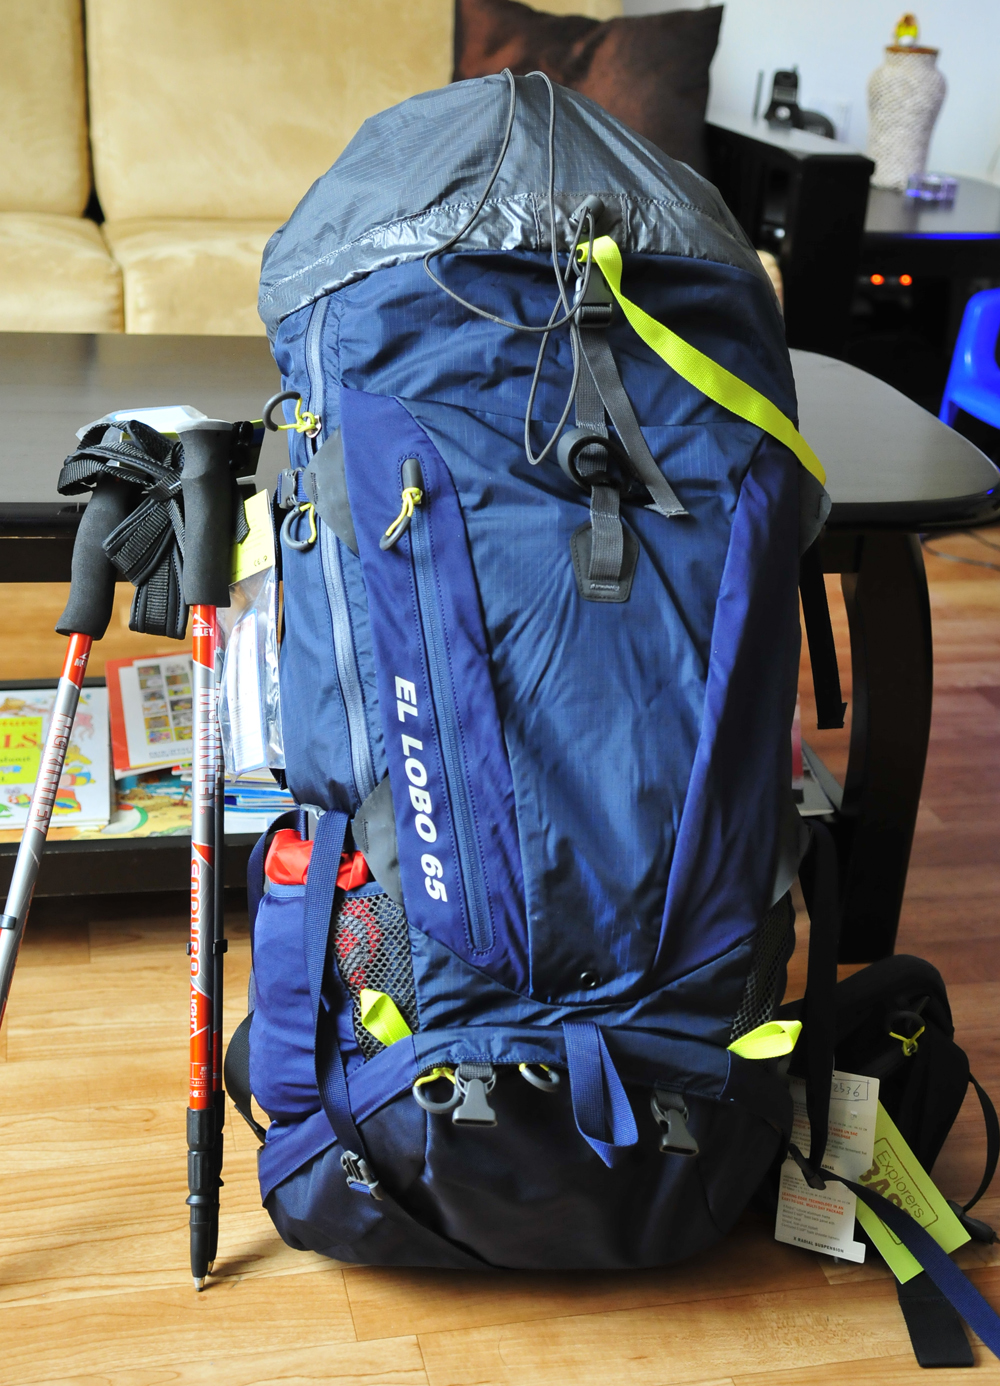 the north face trekking bags